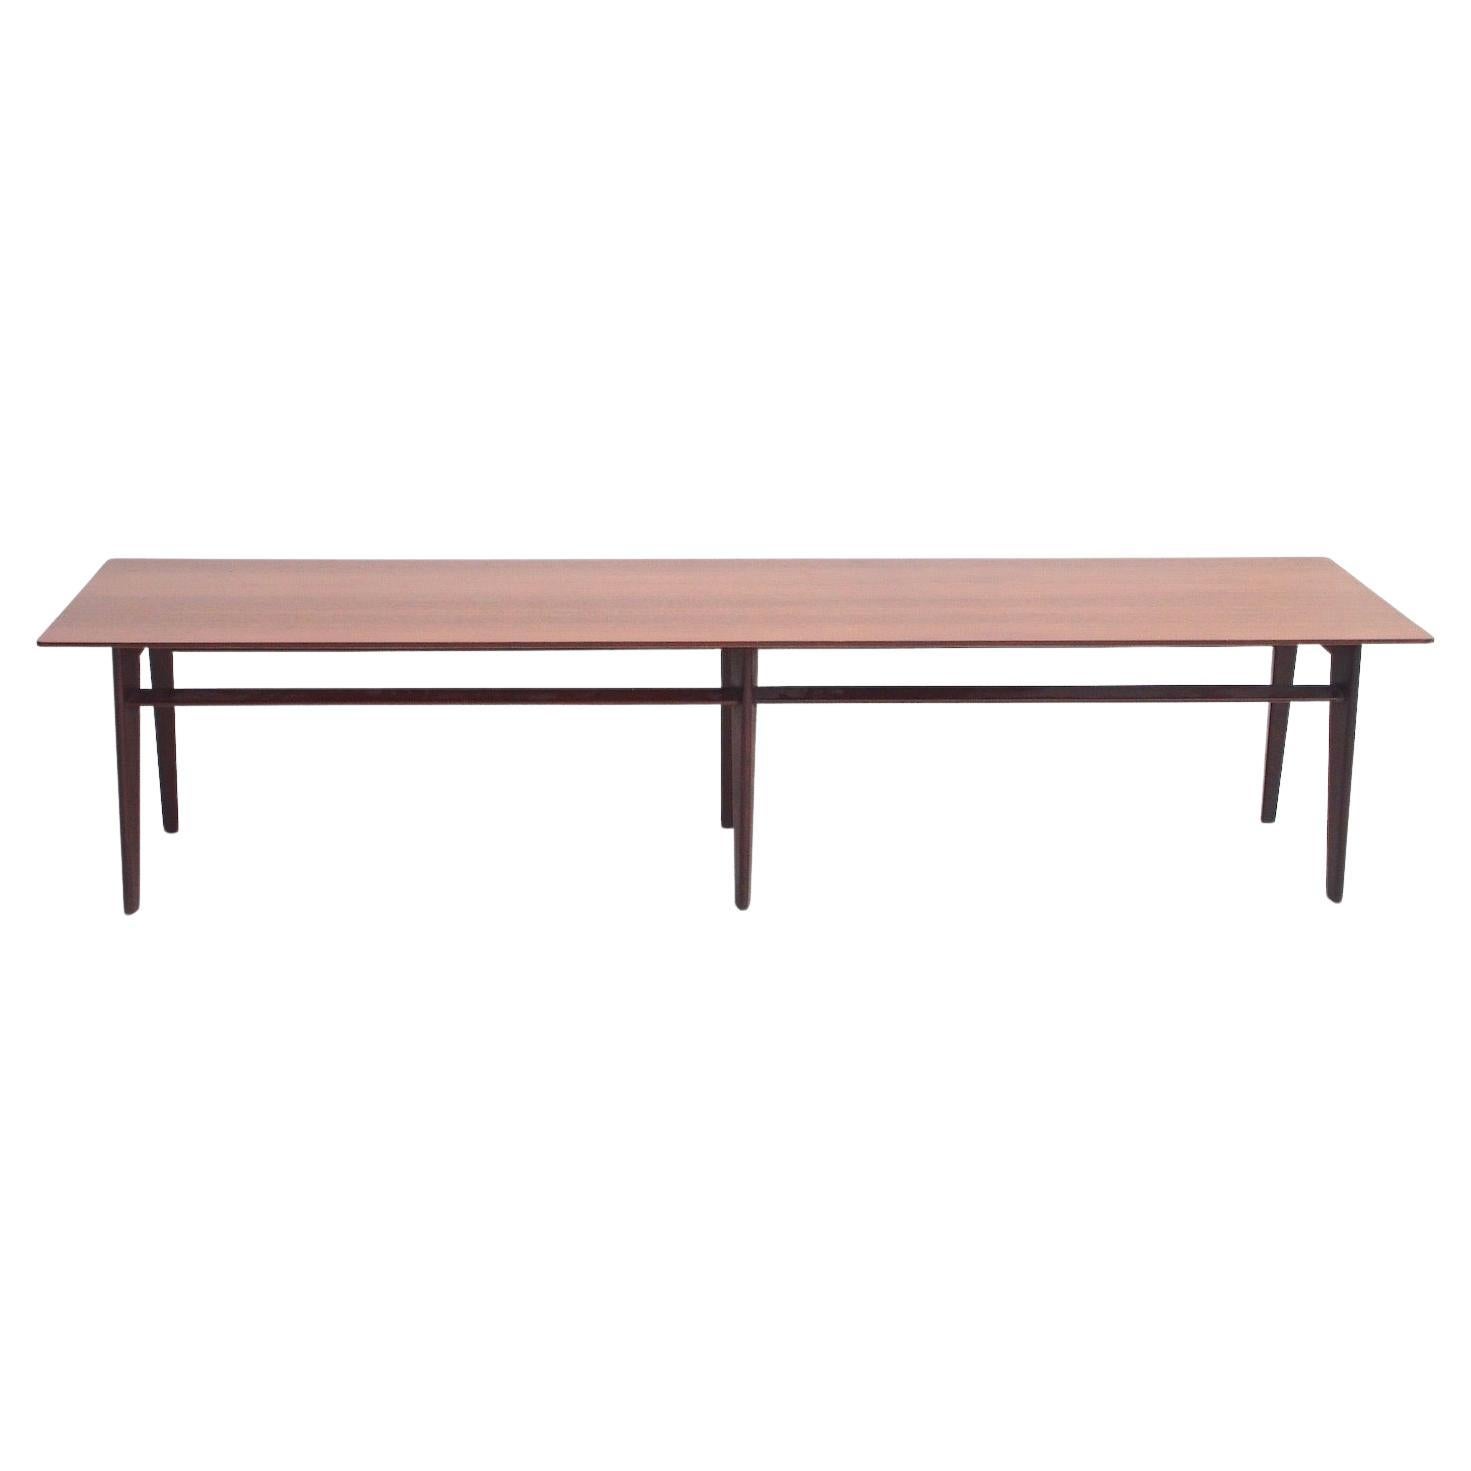 Midcentury Italian Wooden Console or Long Coffee Table